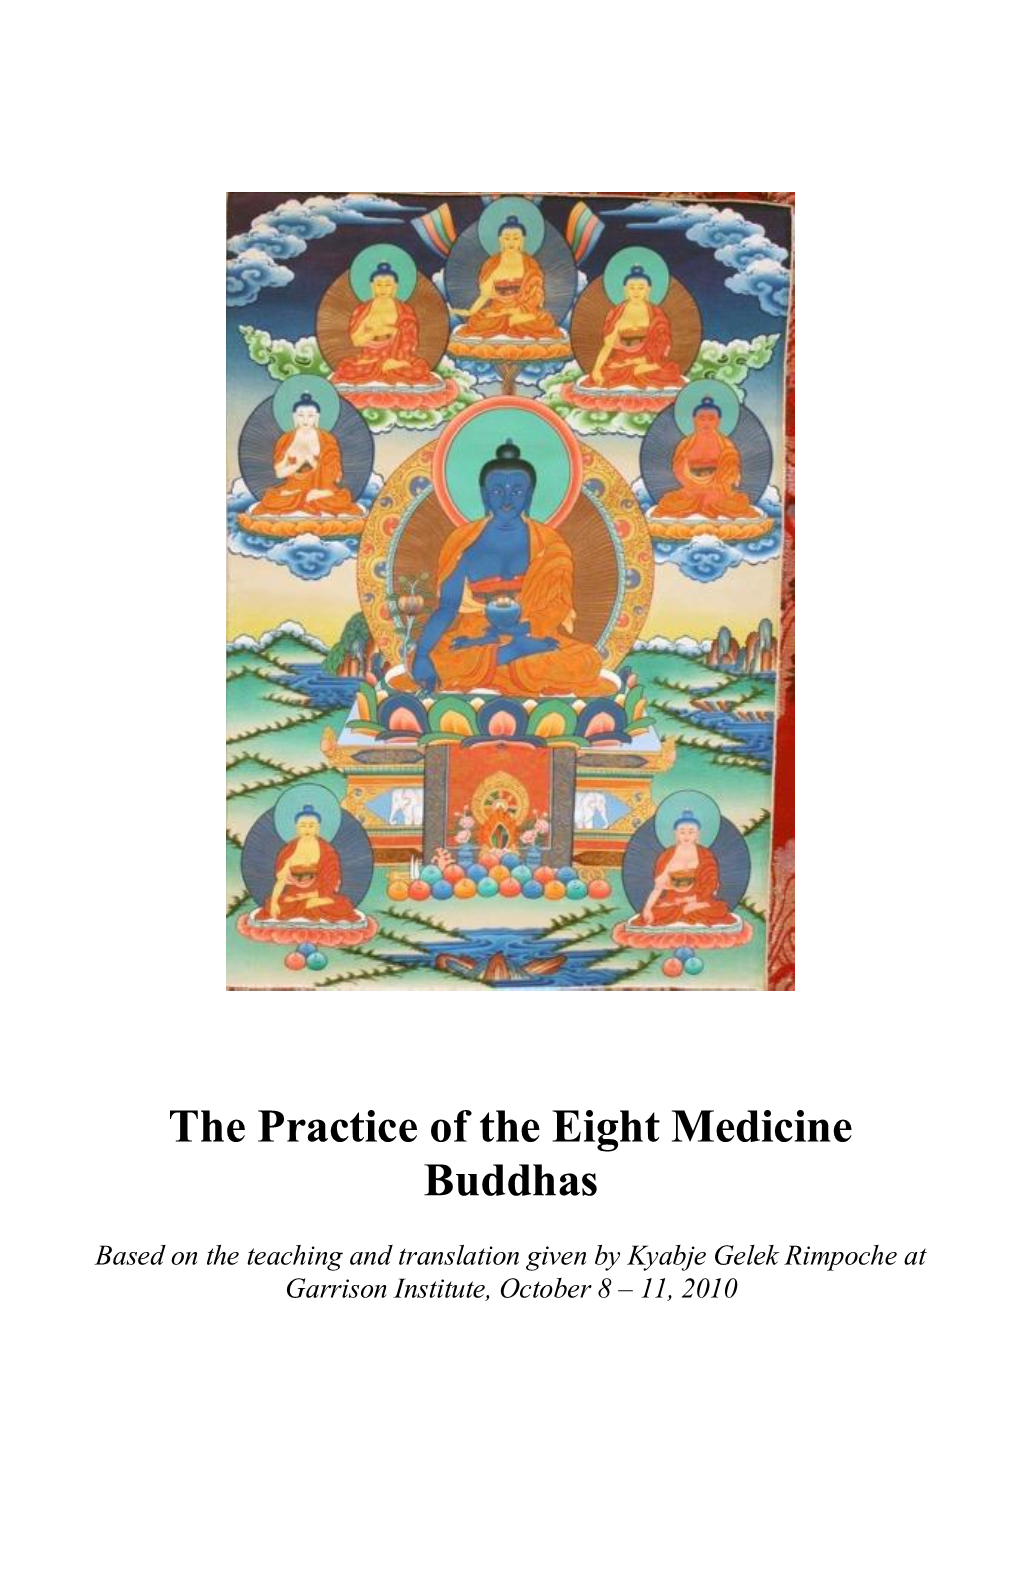 The Practice of the Eight Medicine Buddhas